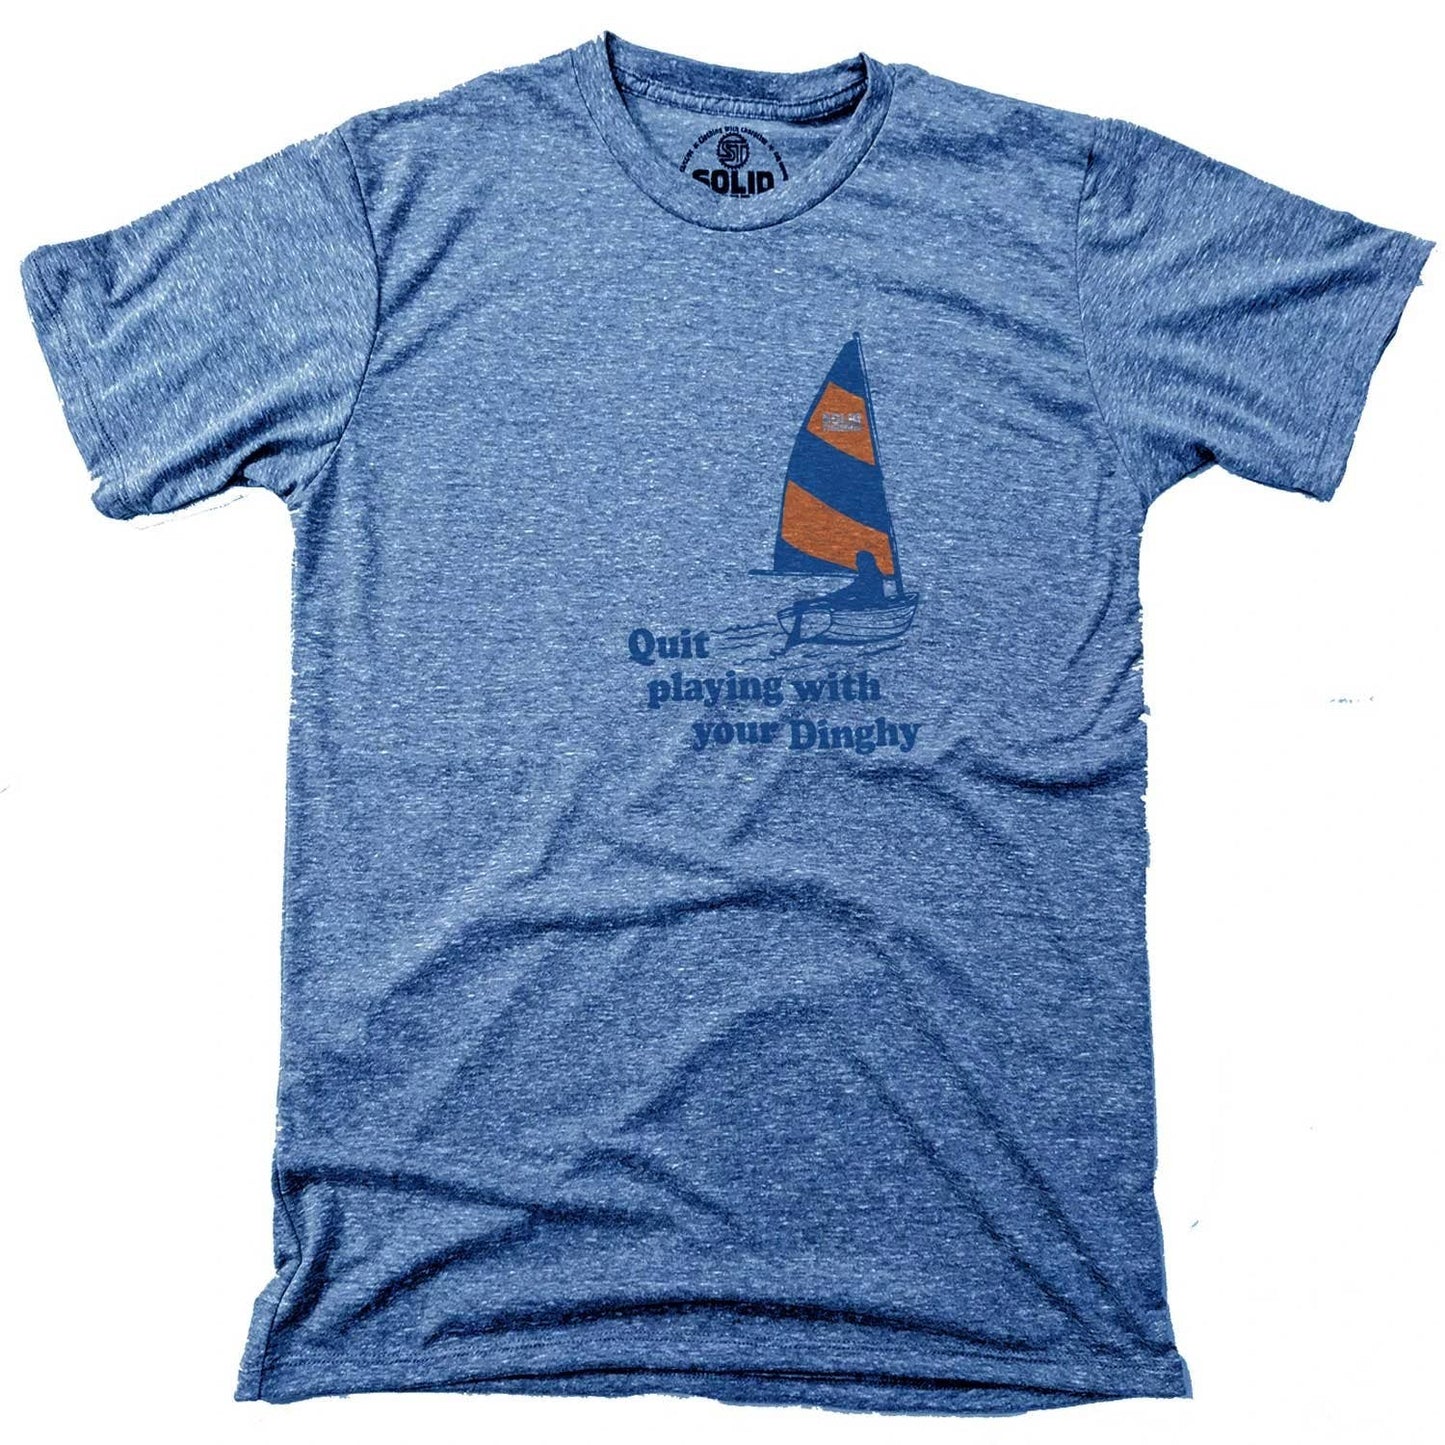 Solid Threads - Men's Quit Playing With Your Dinghy T-shirt